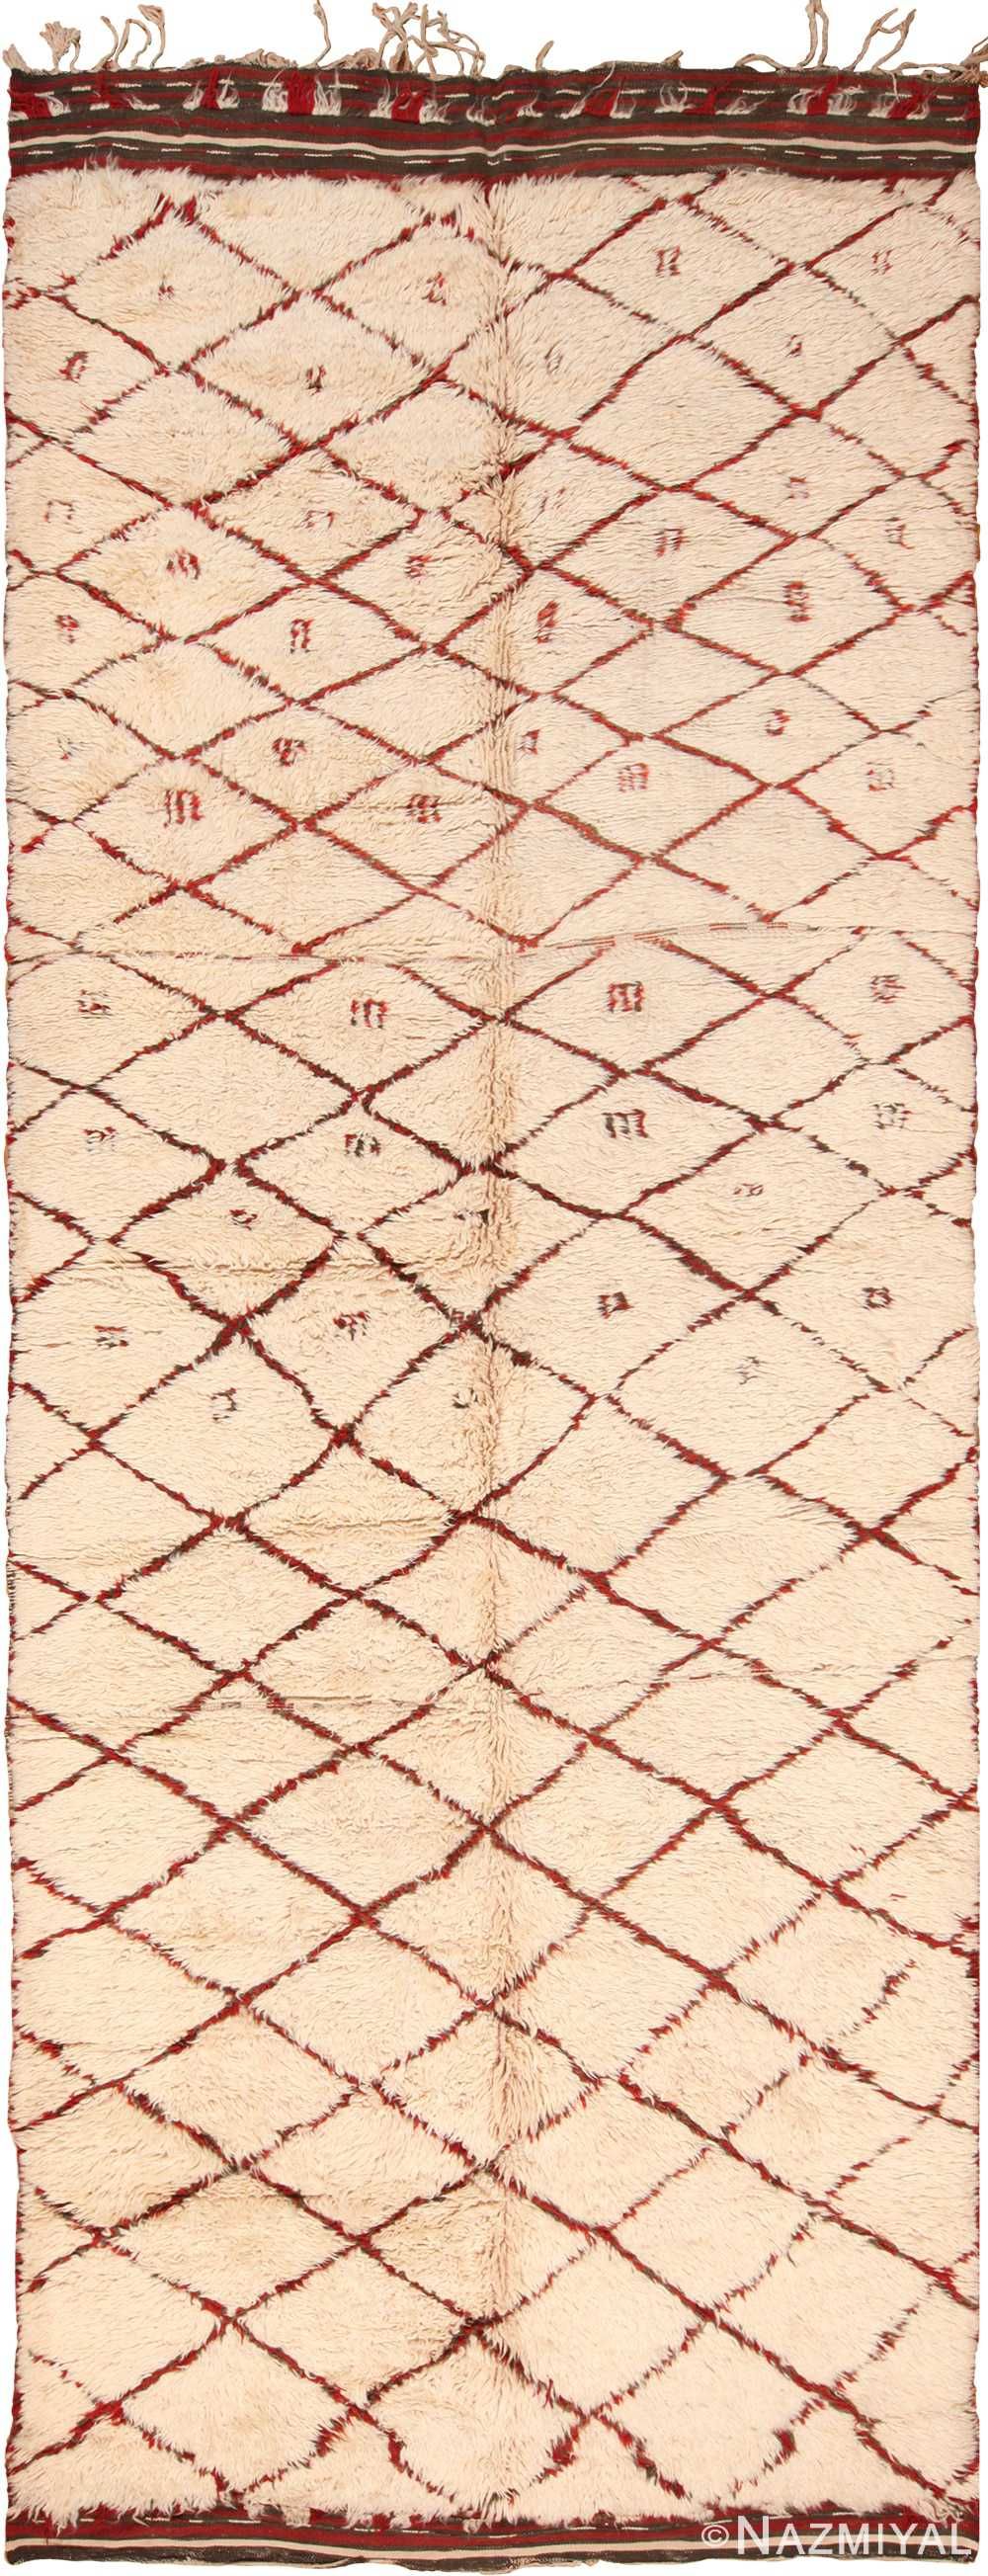 Moroccan Rugs | Shop Vintage Moroccan Rug & Carpet Selection With Regard To Moroccan Rugs (View 8 of 15)